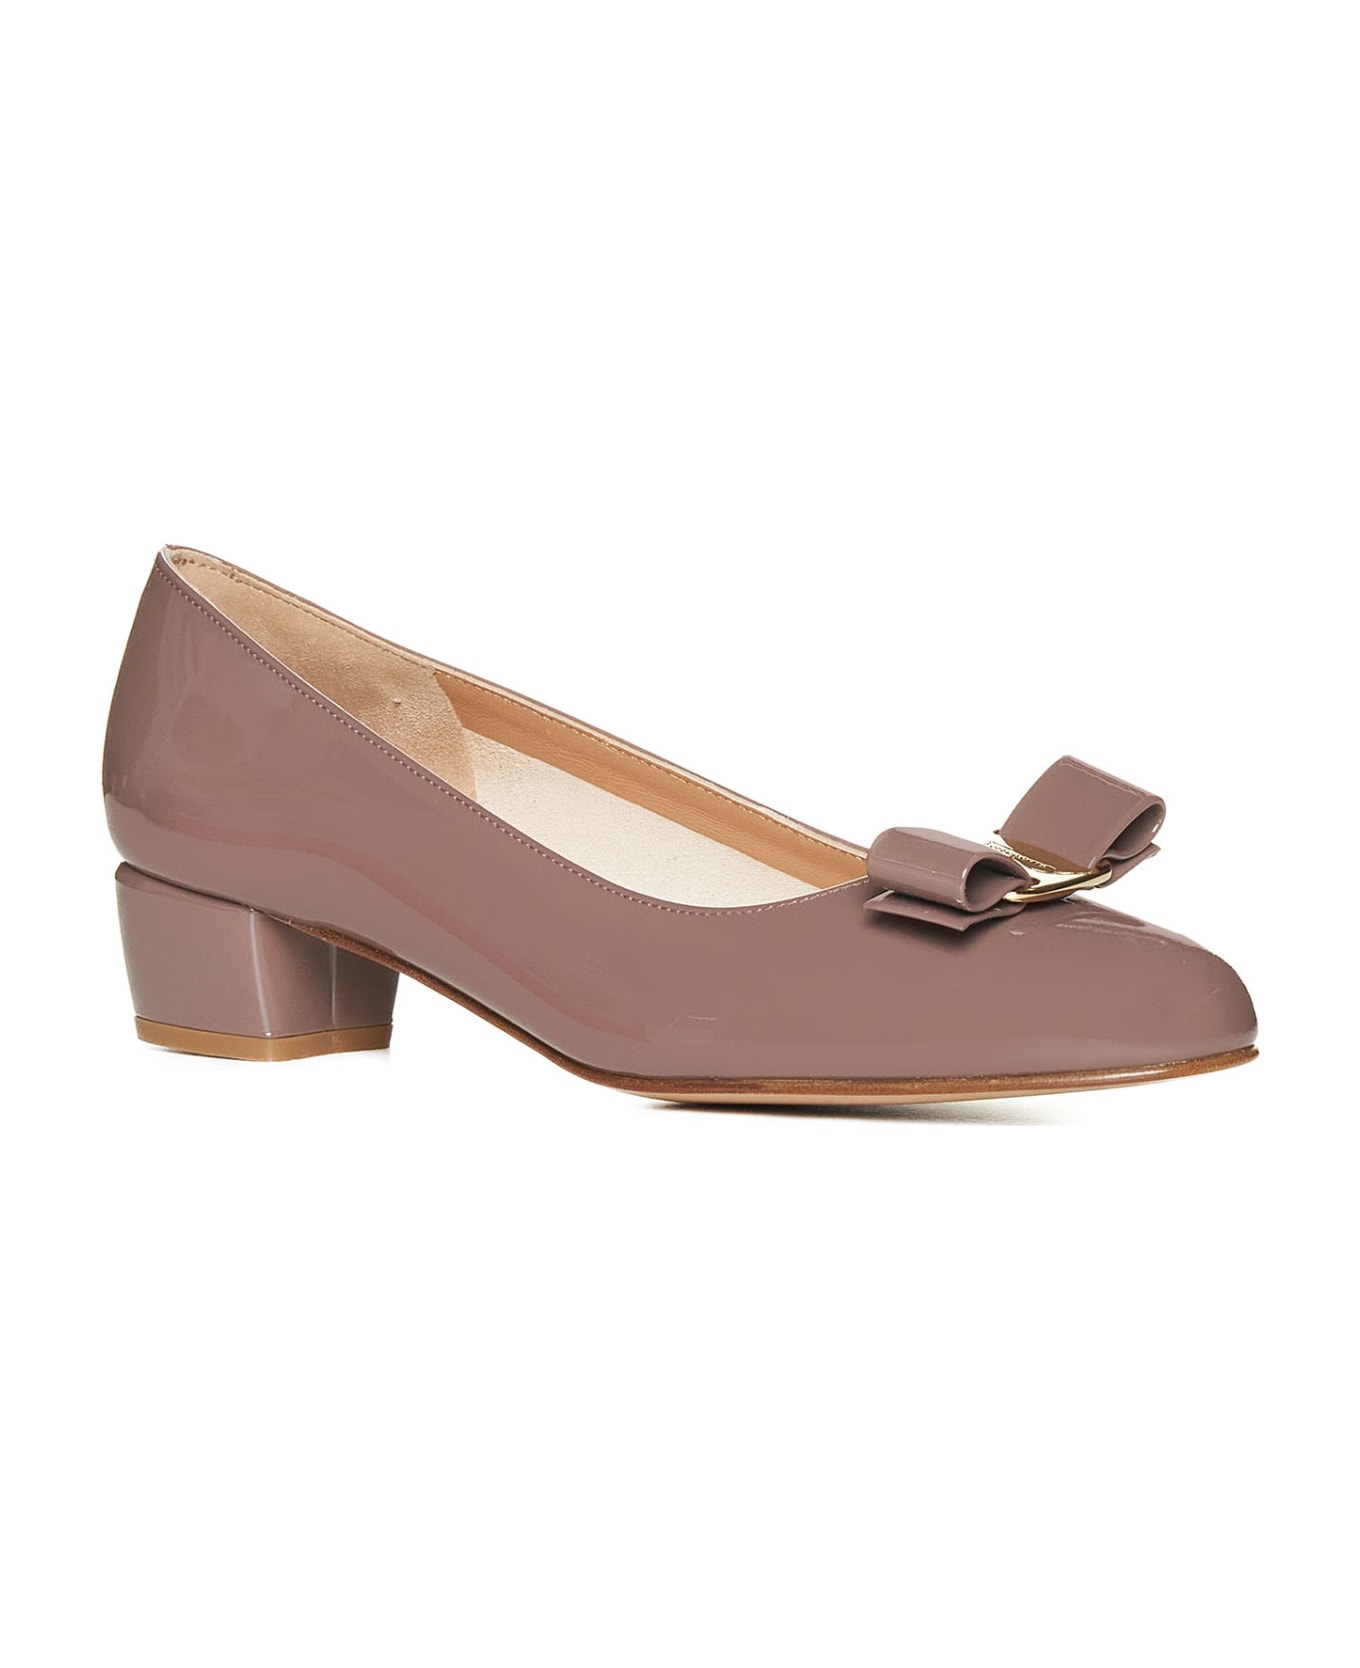 Ferragamo Bow-detailed Slip-on Pumps - Caraway seed ハイヒール